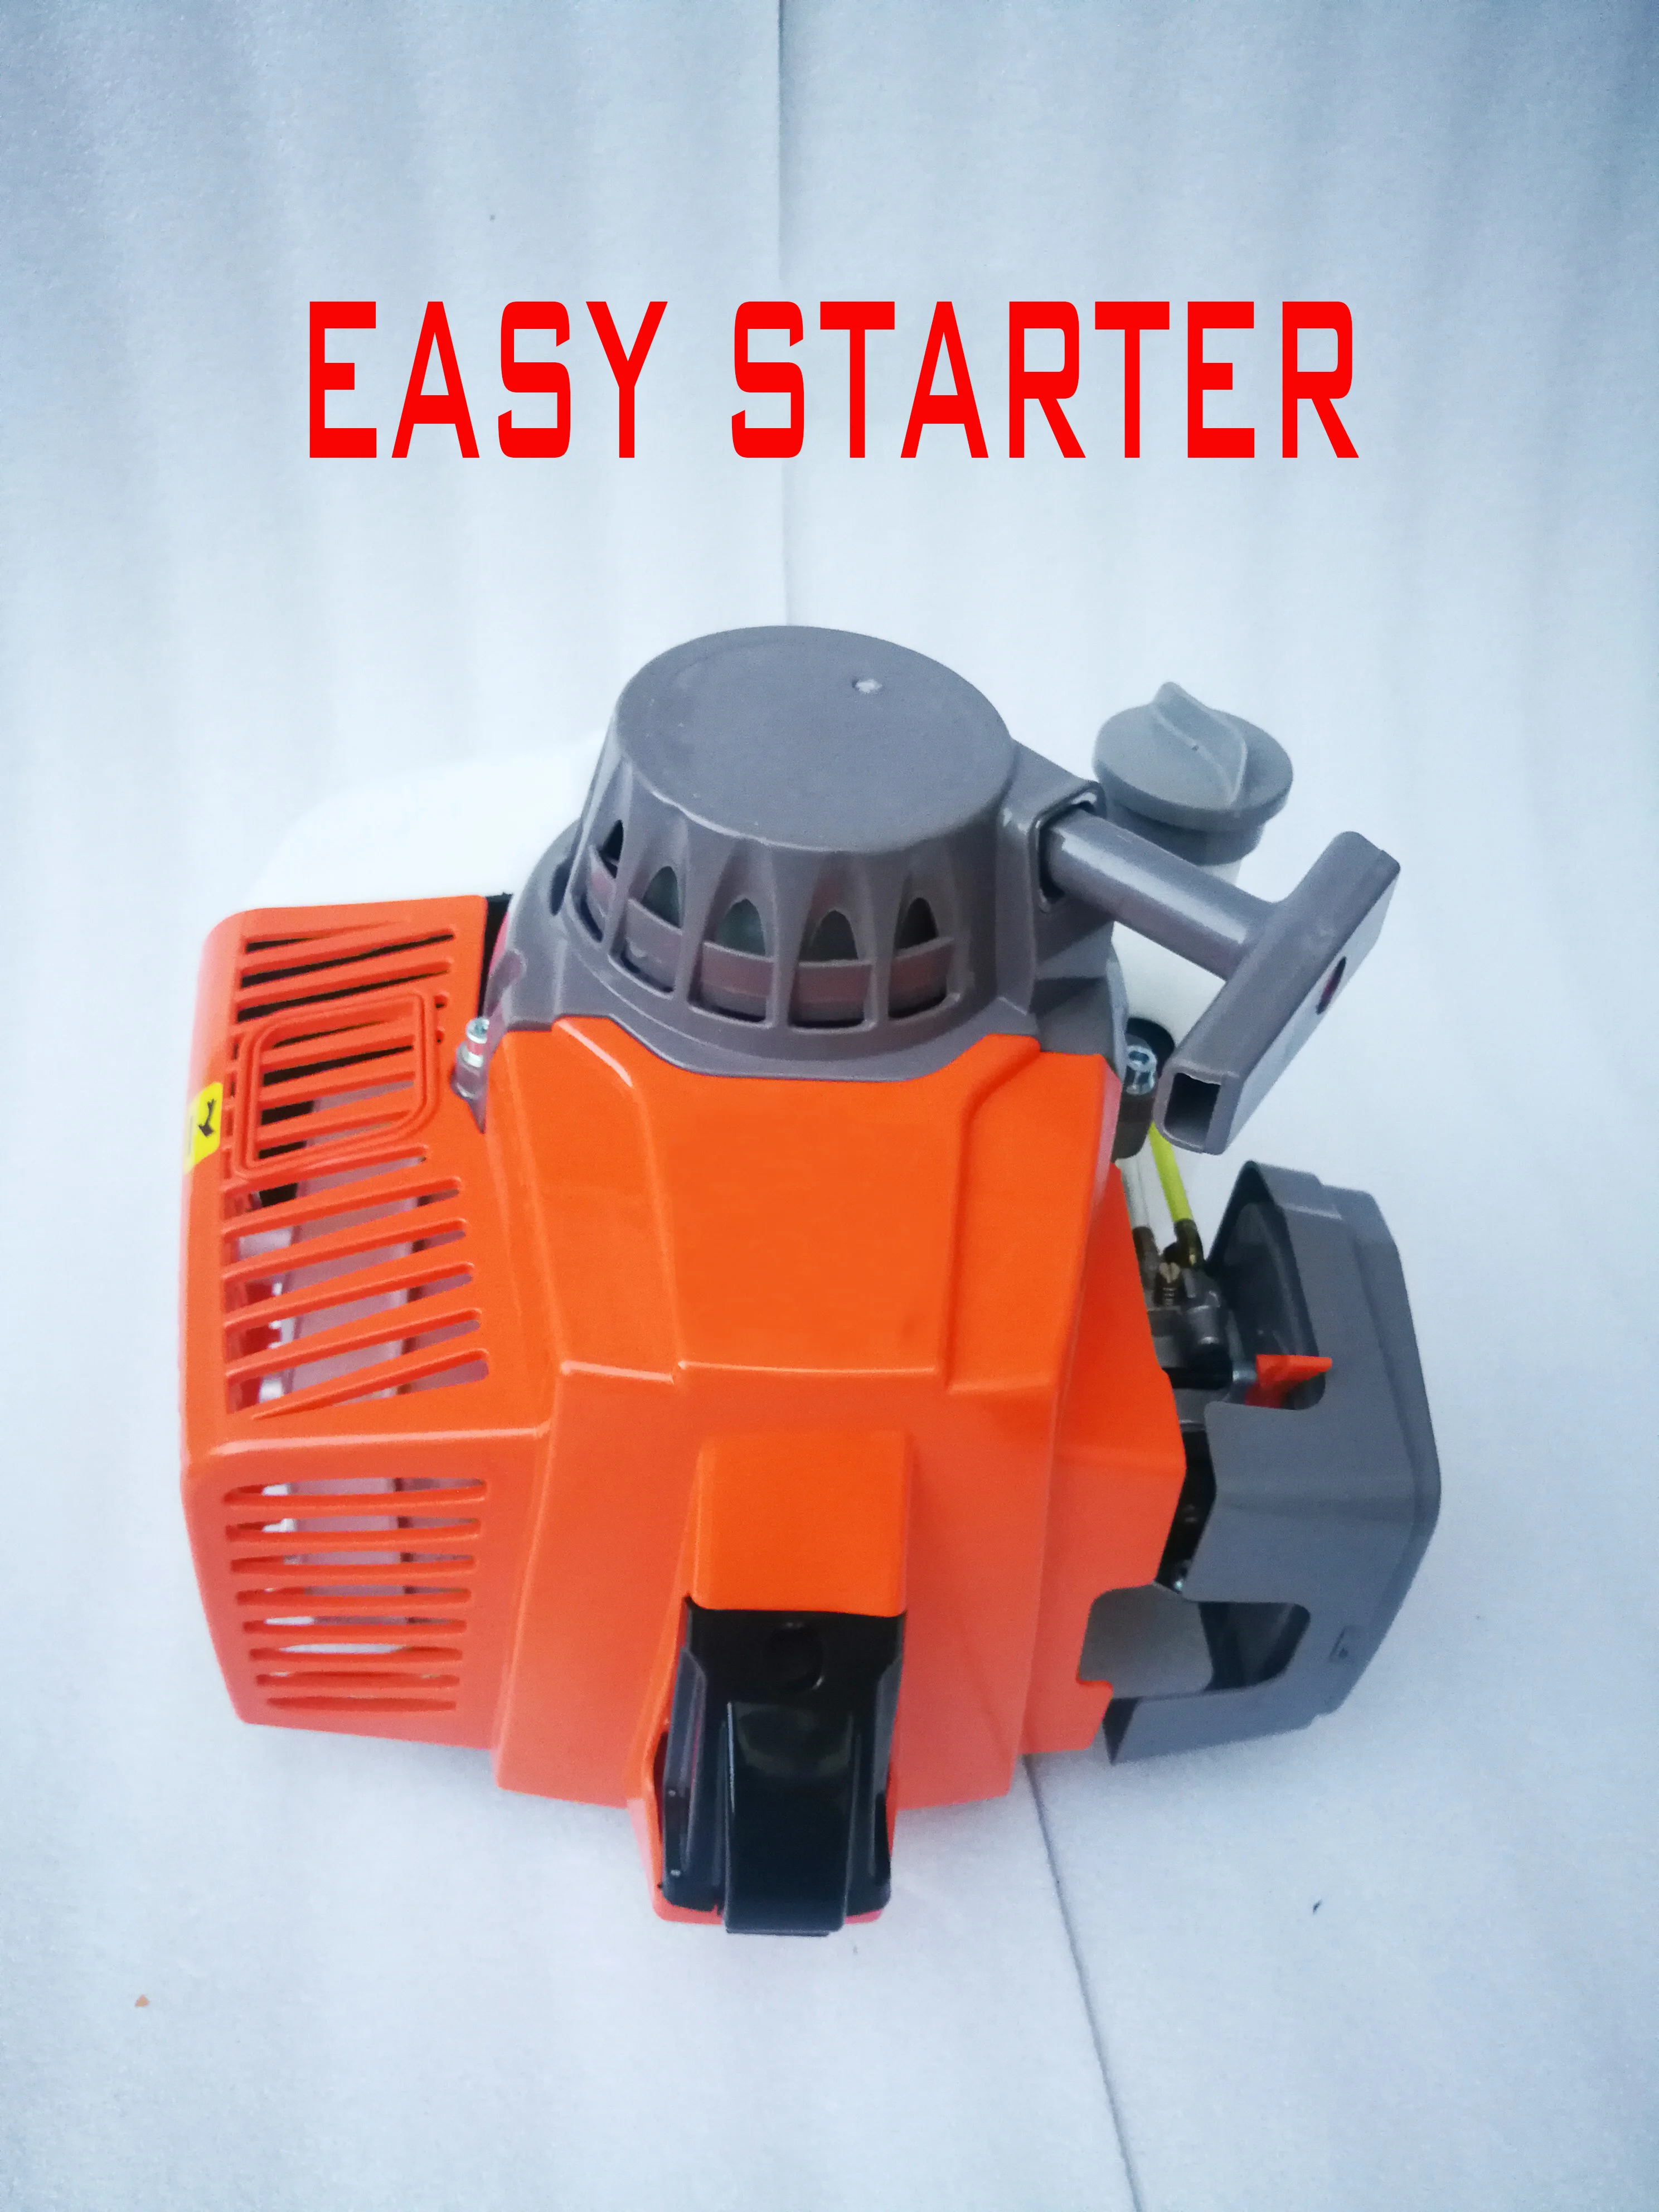 80cc 1E53F 2T Gasoline Engine 2 Stroke For Earth Drill Brush Cutter Grass Trimmer Ground Water Pump Outboard Motor 53mm Big Bore enlarge